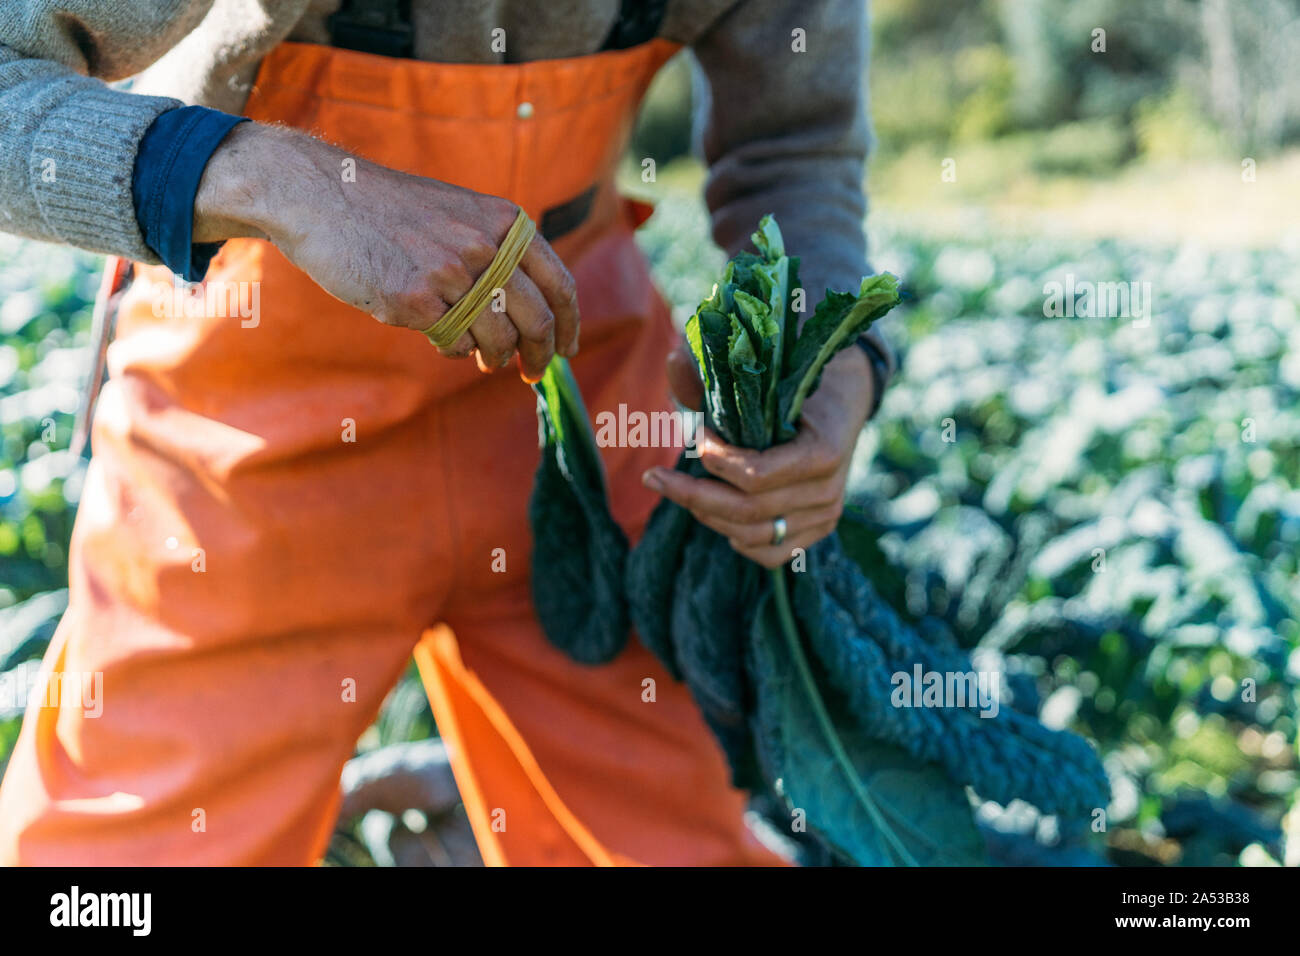 Farmer is collecting organic italian kale for the market Stock Photo